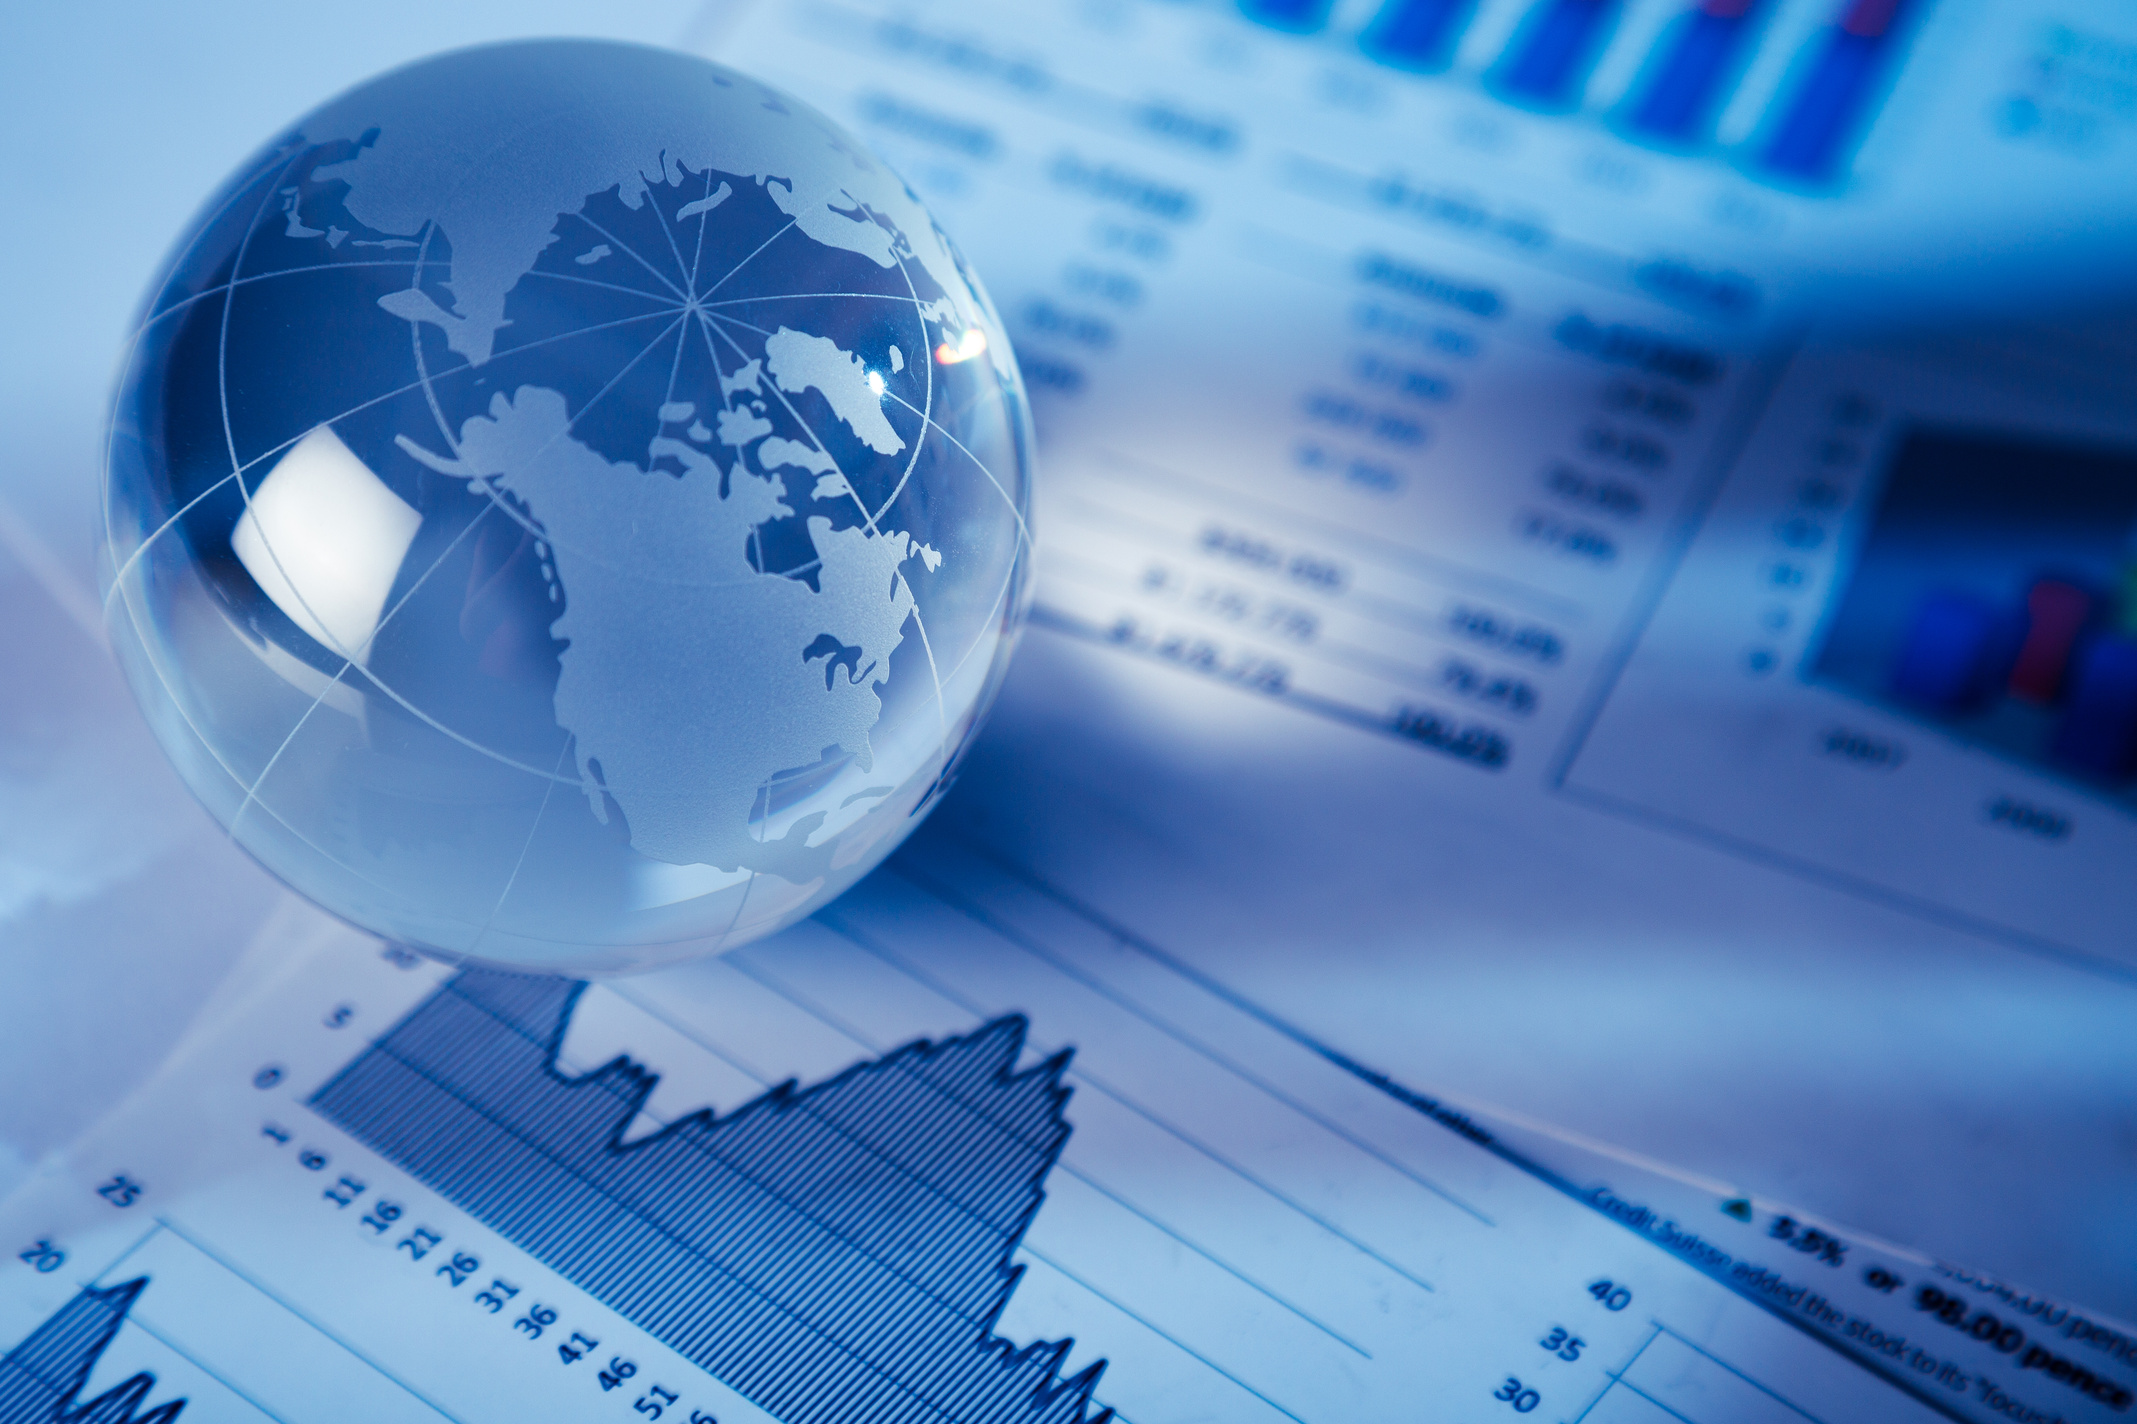 Glass Globe On Financial Reports Close-up